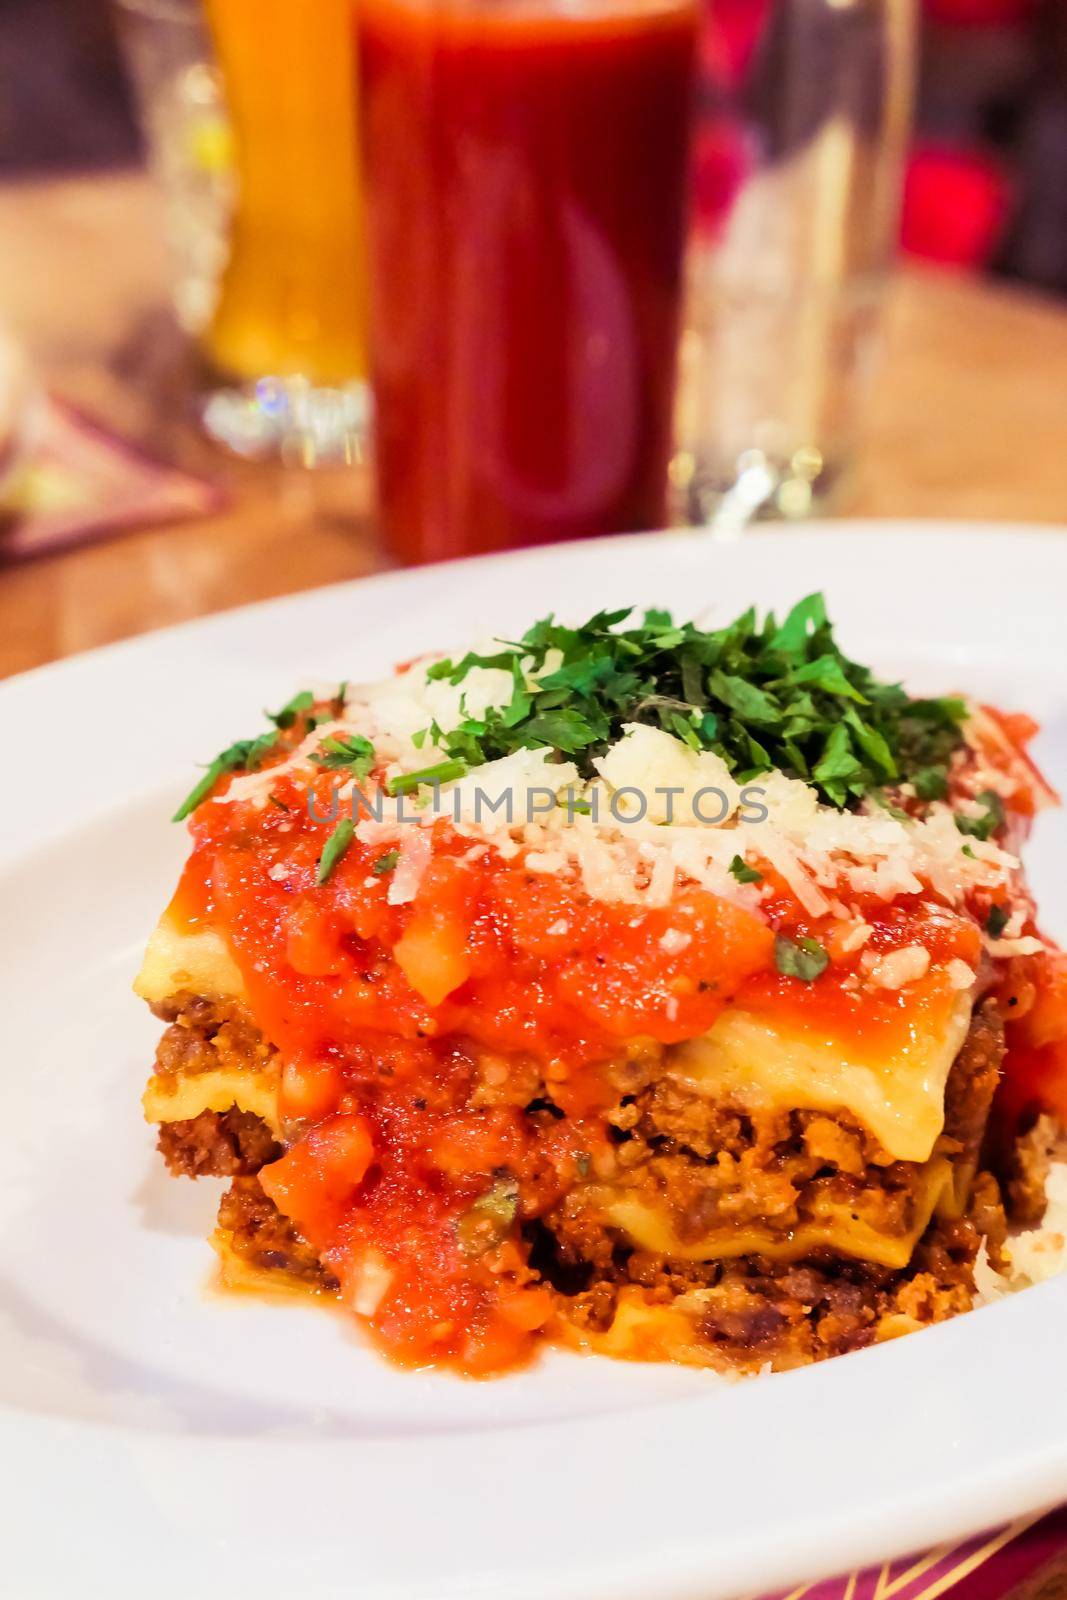 Italian cuisine, restaurant menu and food photography blog concept - Lasagna bolognese plate, traditional recipe with tomato sauce, cheese and meat